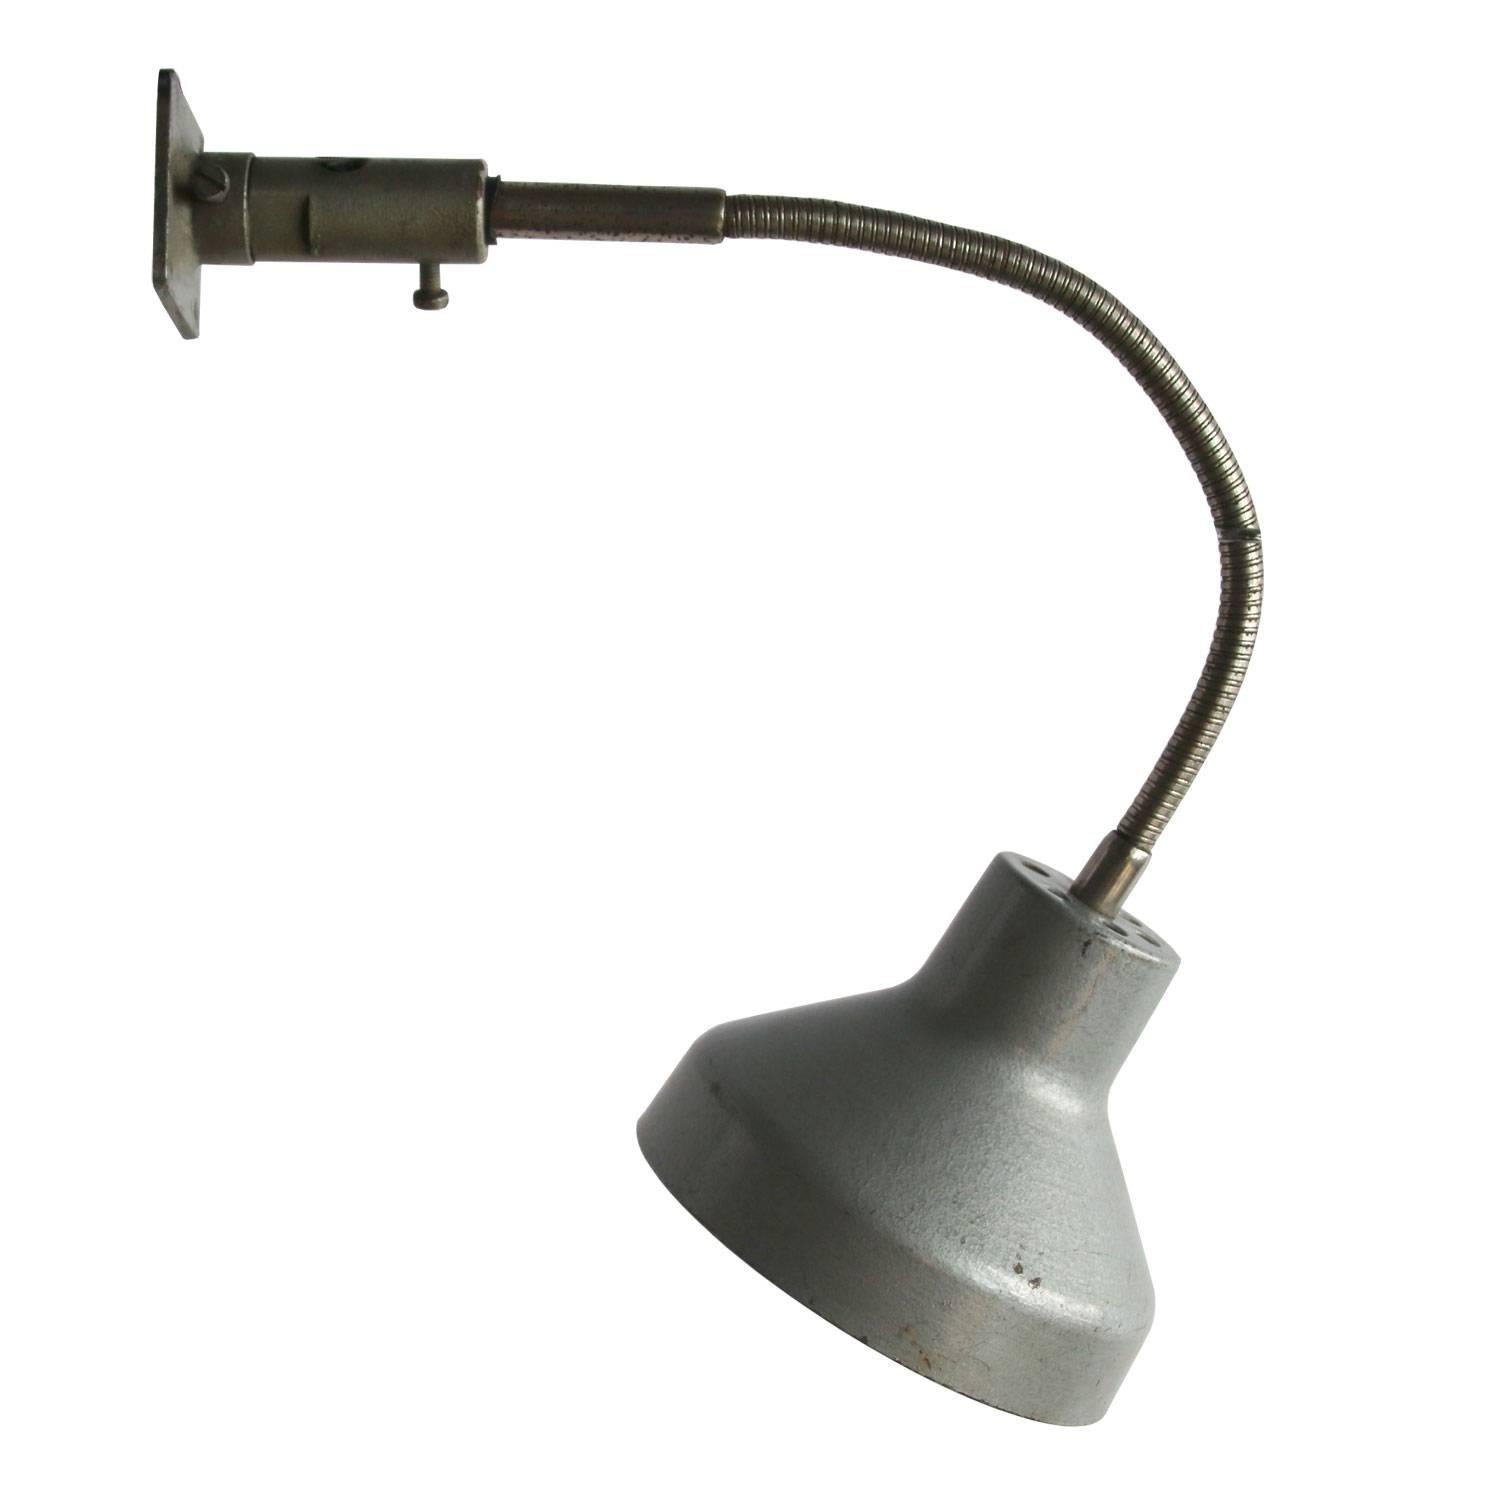 Pranie. Metal work light with flexible arm. Aluminium shade.
Size foot 6 × 6 cm.

Weight: 1.1 kg / 2.4 lb

All lamps have been made suitable by international standards for incandescent light bulbs, energy-efficient and LED bulbs. E26/E27 bulb